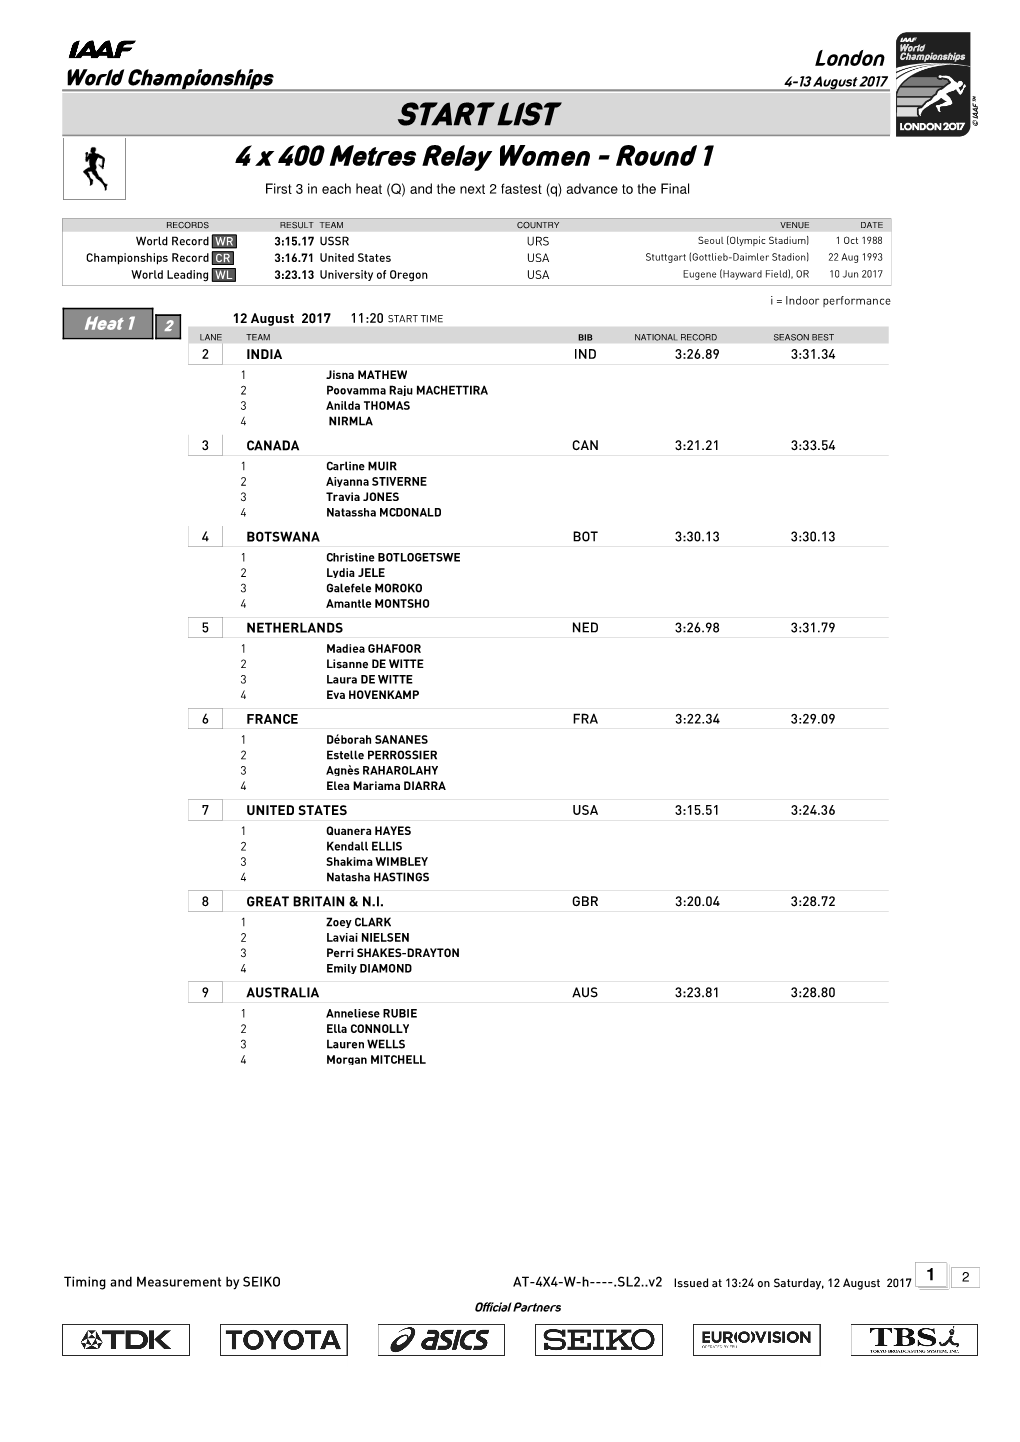 START LIST 4 X 400 Metres Relay Women - Round 1 First 3 in Each Heat (Q) and the Next 2 Fastest (Q) Advance to the Final